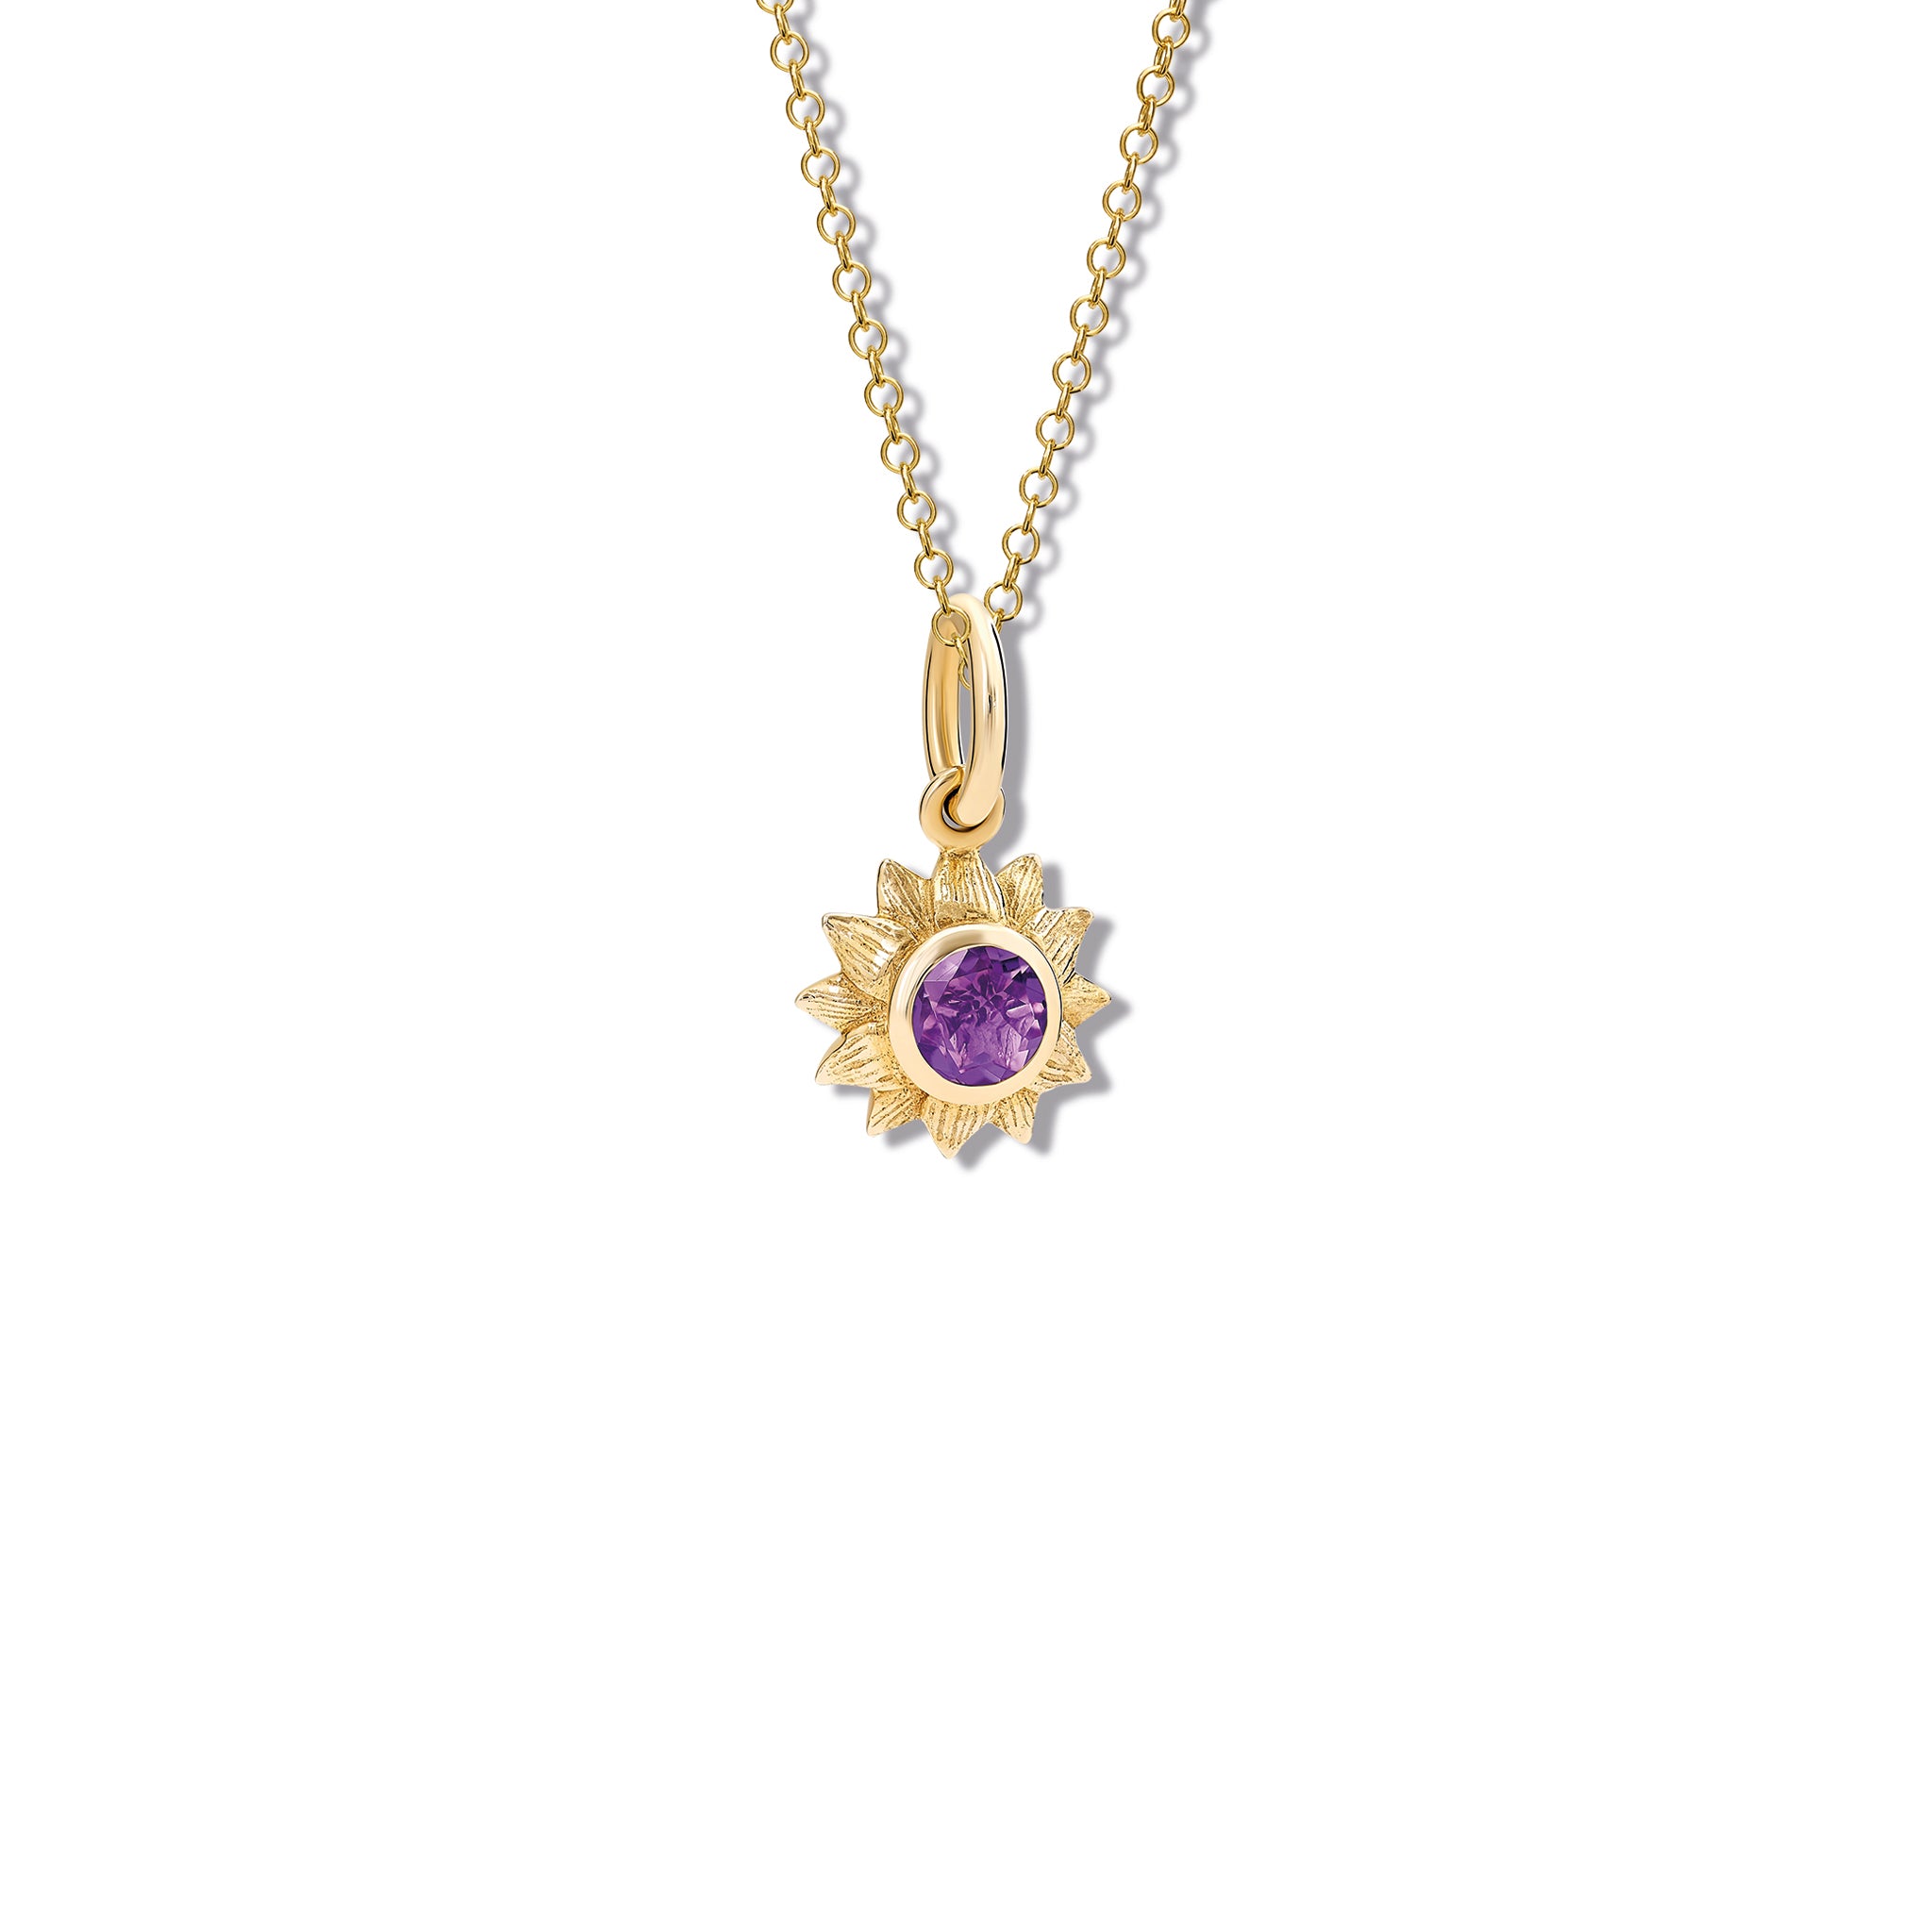 Sunflower Necklace Pendant Yellow Gold - Amethyst